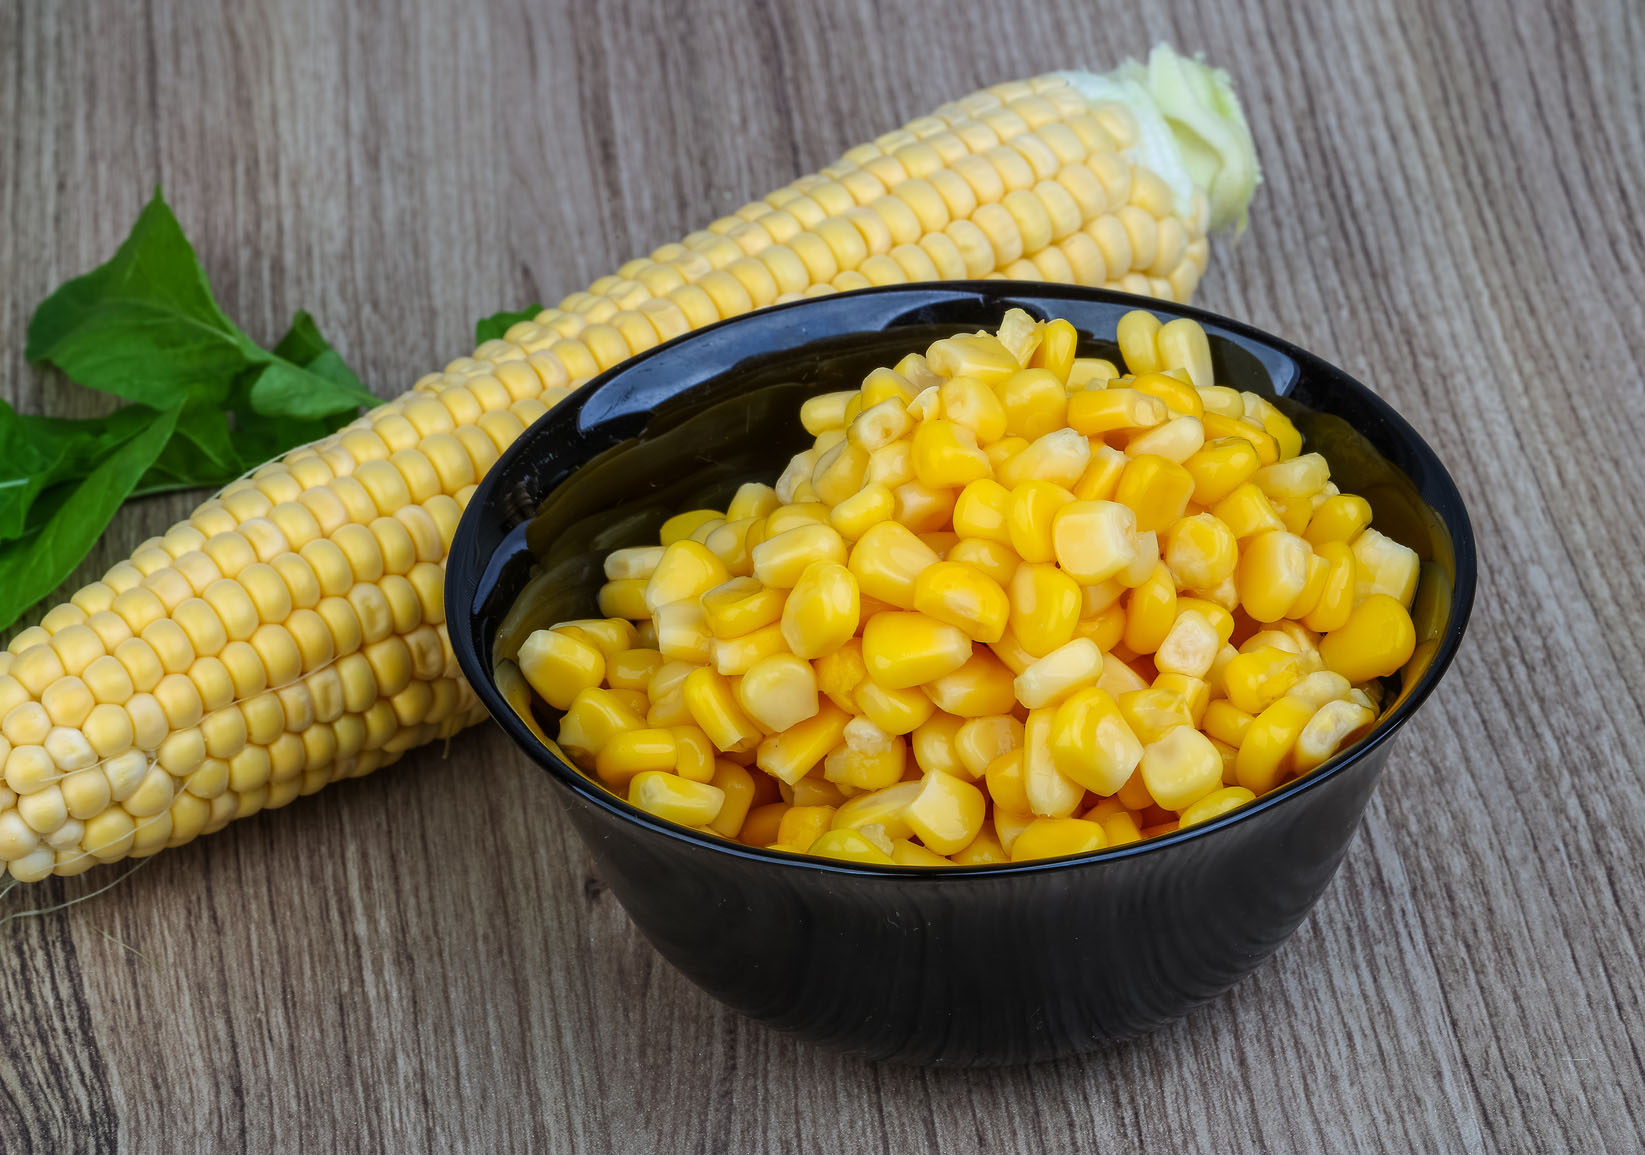 Part of our diet for centuries, corn is not only tasty but has a wide range...